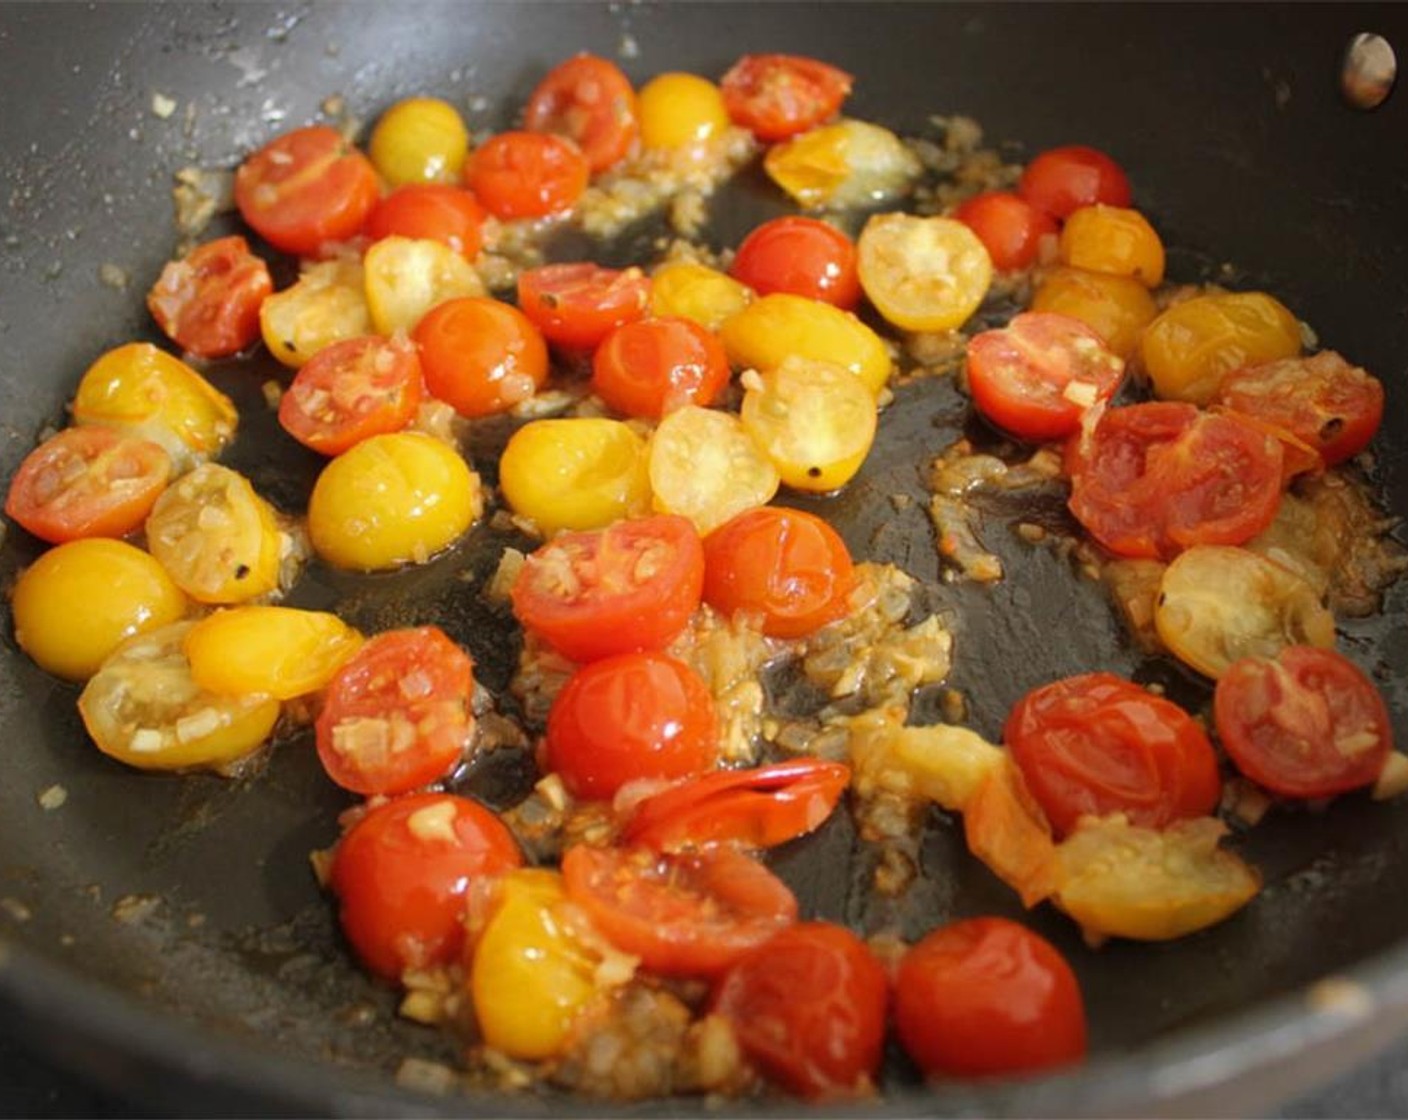 step 11 Add the Cherry Tomatoes (2 cups) to the pan and cook for about 4 minutes until the tomatoes start to burst. Crush a couple tomatoes with a spatula to release some extra juice. At this point, I like to remove a third of the tomatoes from the pan to serve on top of the cutlets, but this optional.